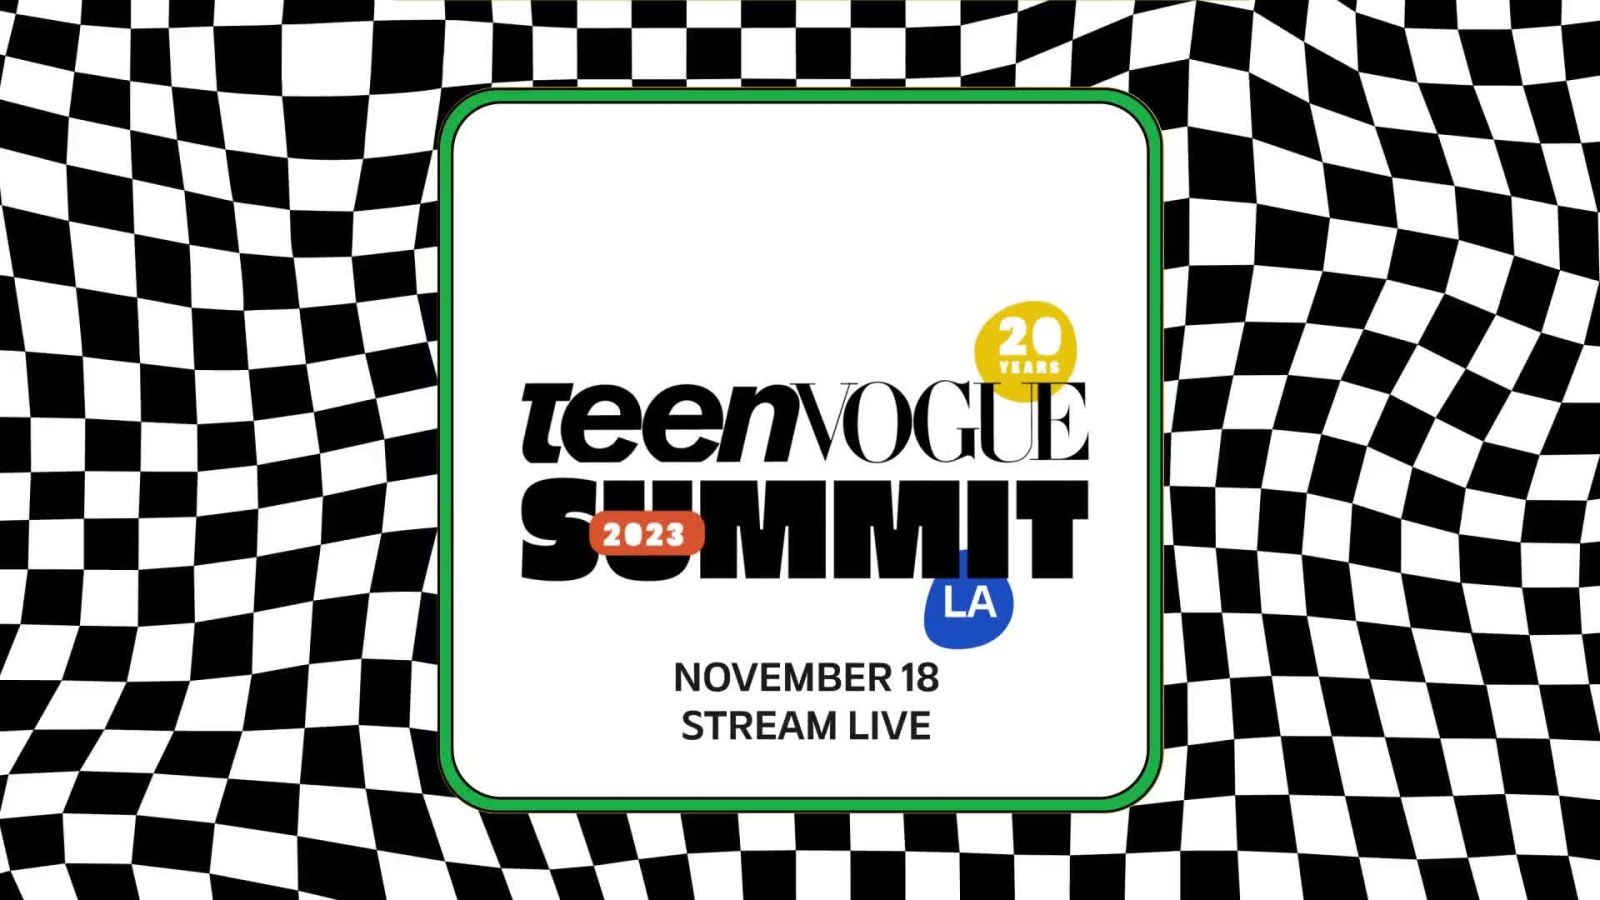 Are you ready for Teen Vogue Summit 2023? Stream it live, Nov. 18!